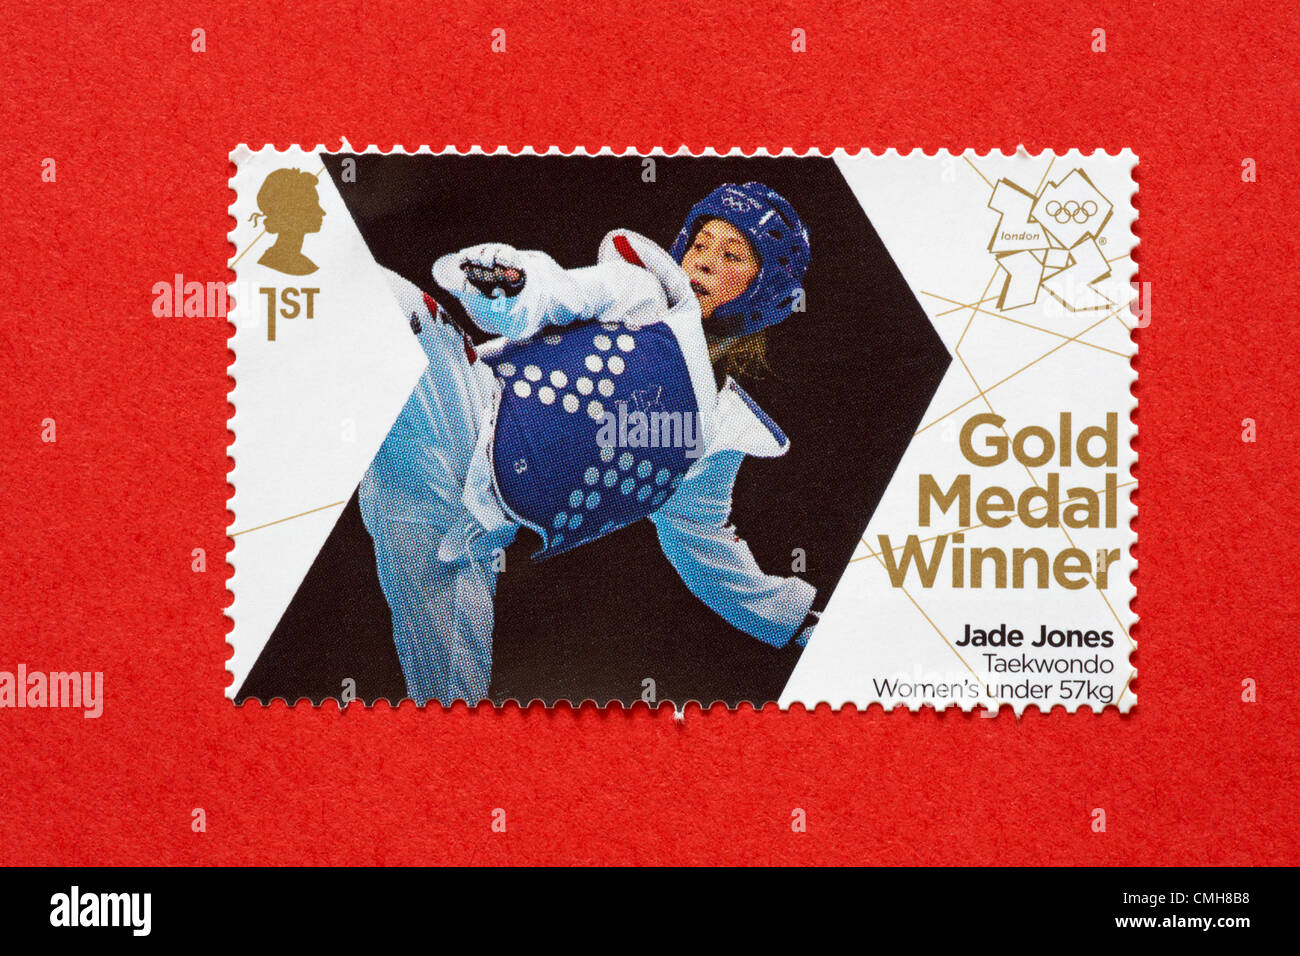 UK Friday 10 August 2012. Stamp to honour gold medal winner Jade Jones in the Taekwondo Women's under 57kg event. Stamp purchased and stuck on red envelope to send to Olympic supporter.  Credit:  Carolyn Jenkins / Alamy Live News Stock Photo